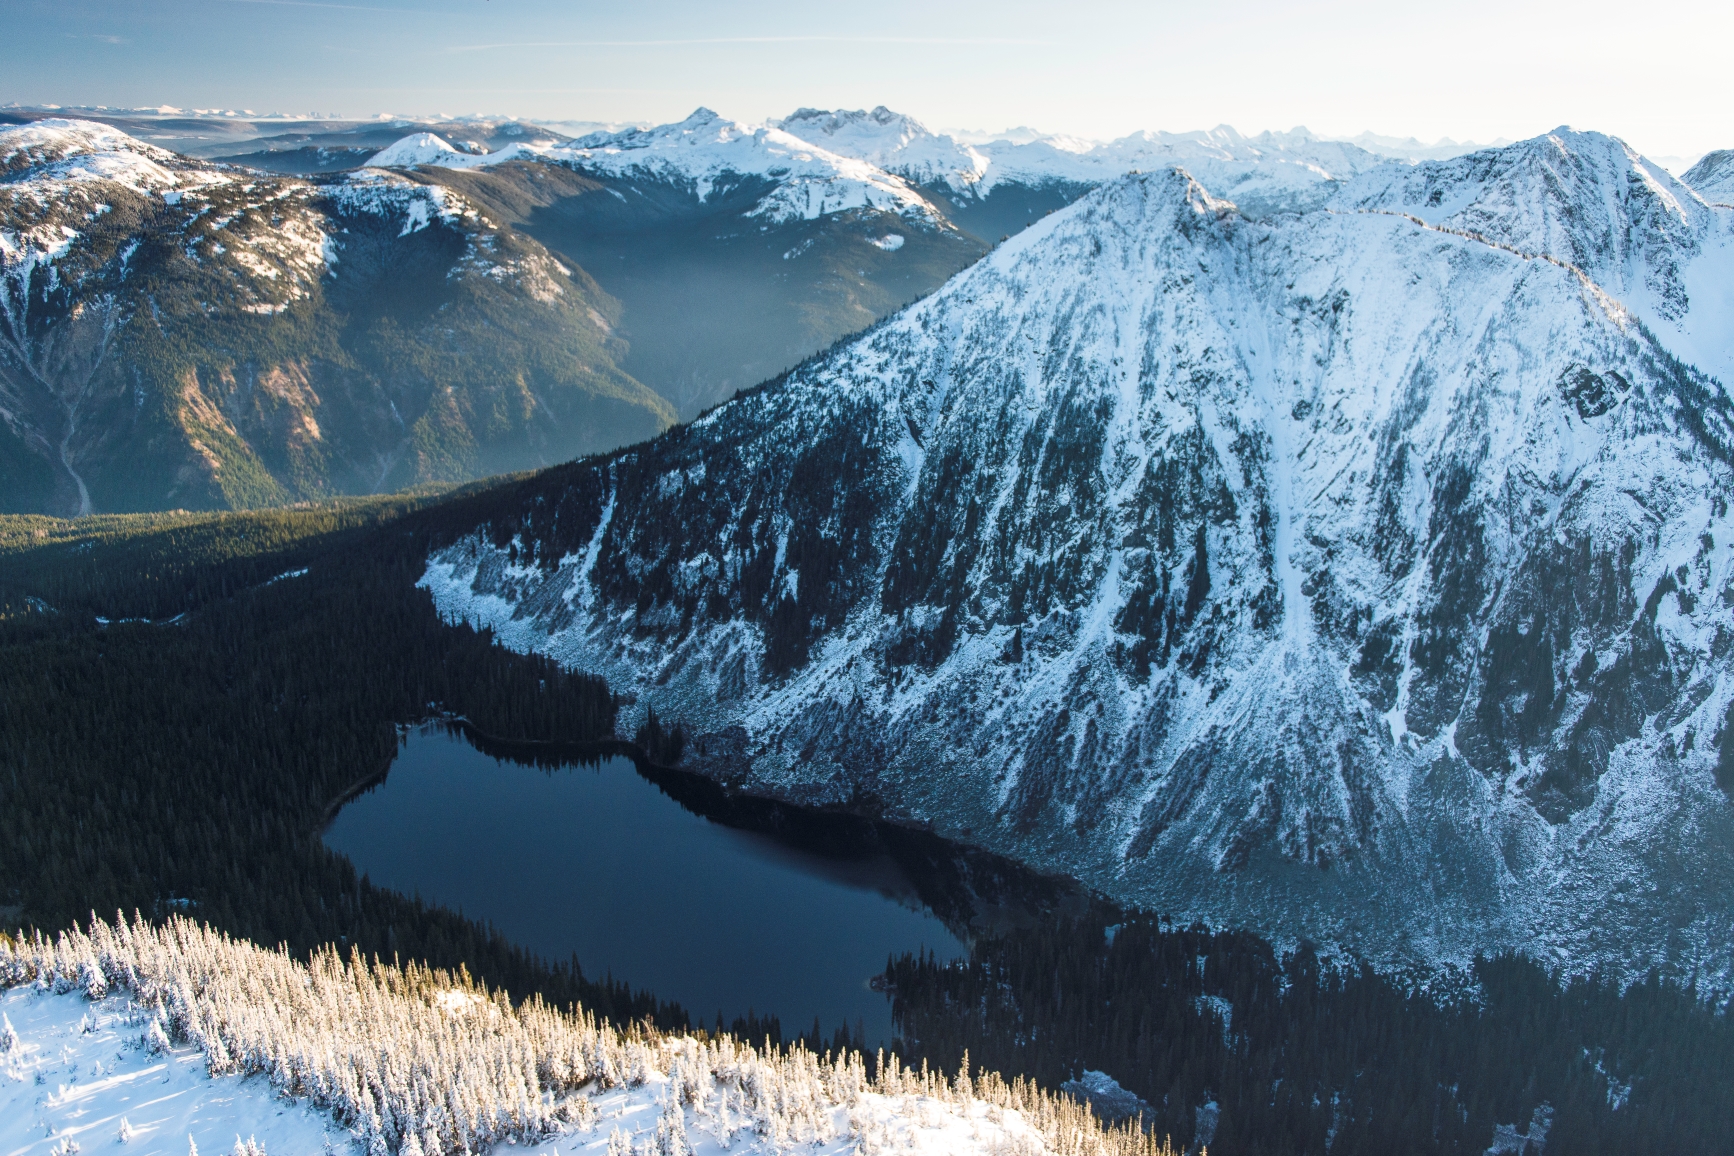 Aerial shot of the snow covered mountains, with the lake and forest in the distance.